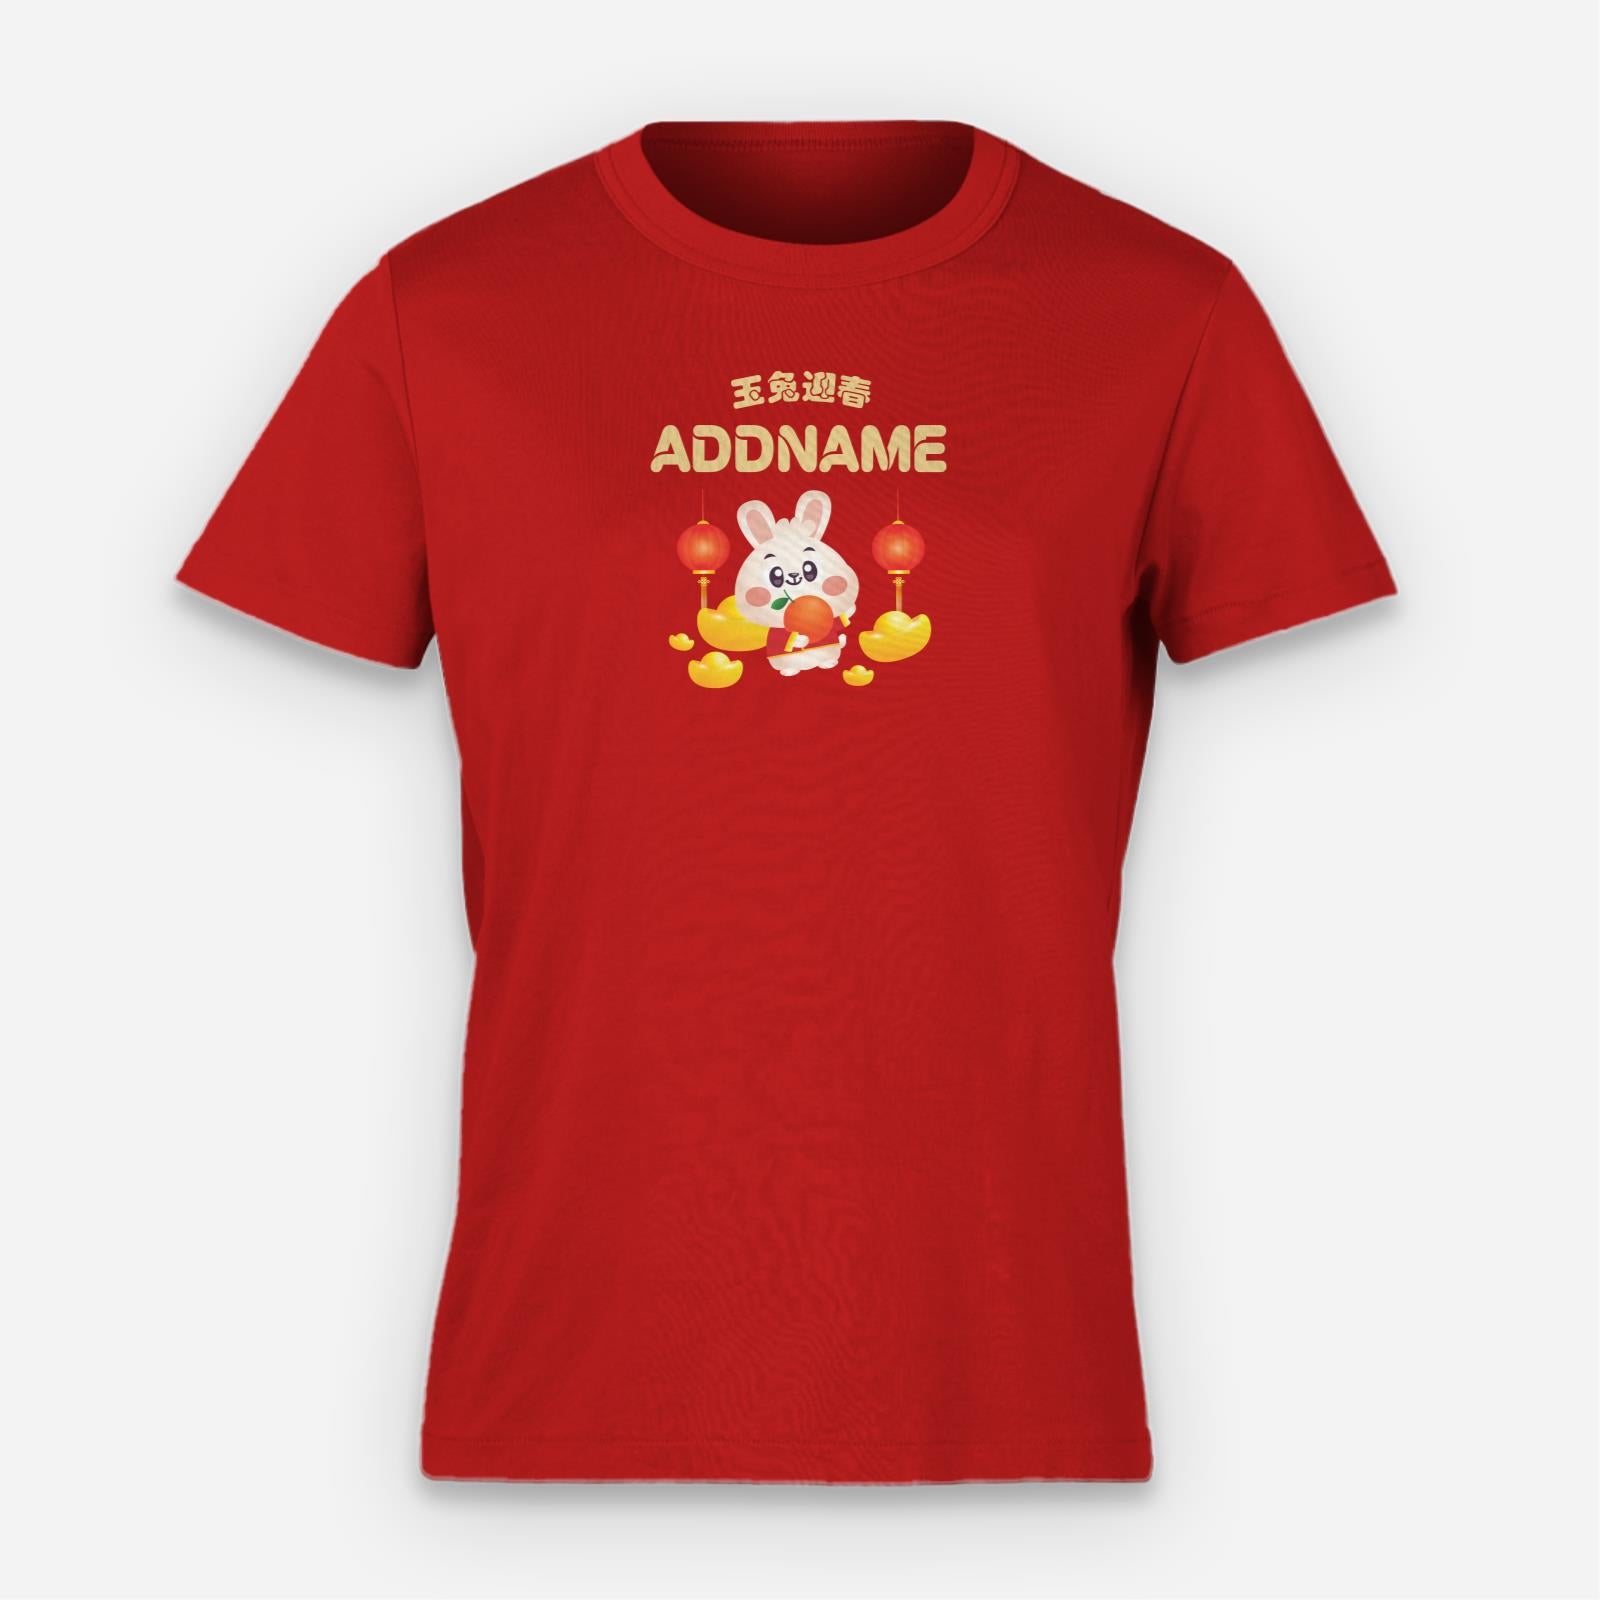 Cny Rabbit Family - Brother Rabbit Slim Fit Women Tee Shirt with English Personalization